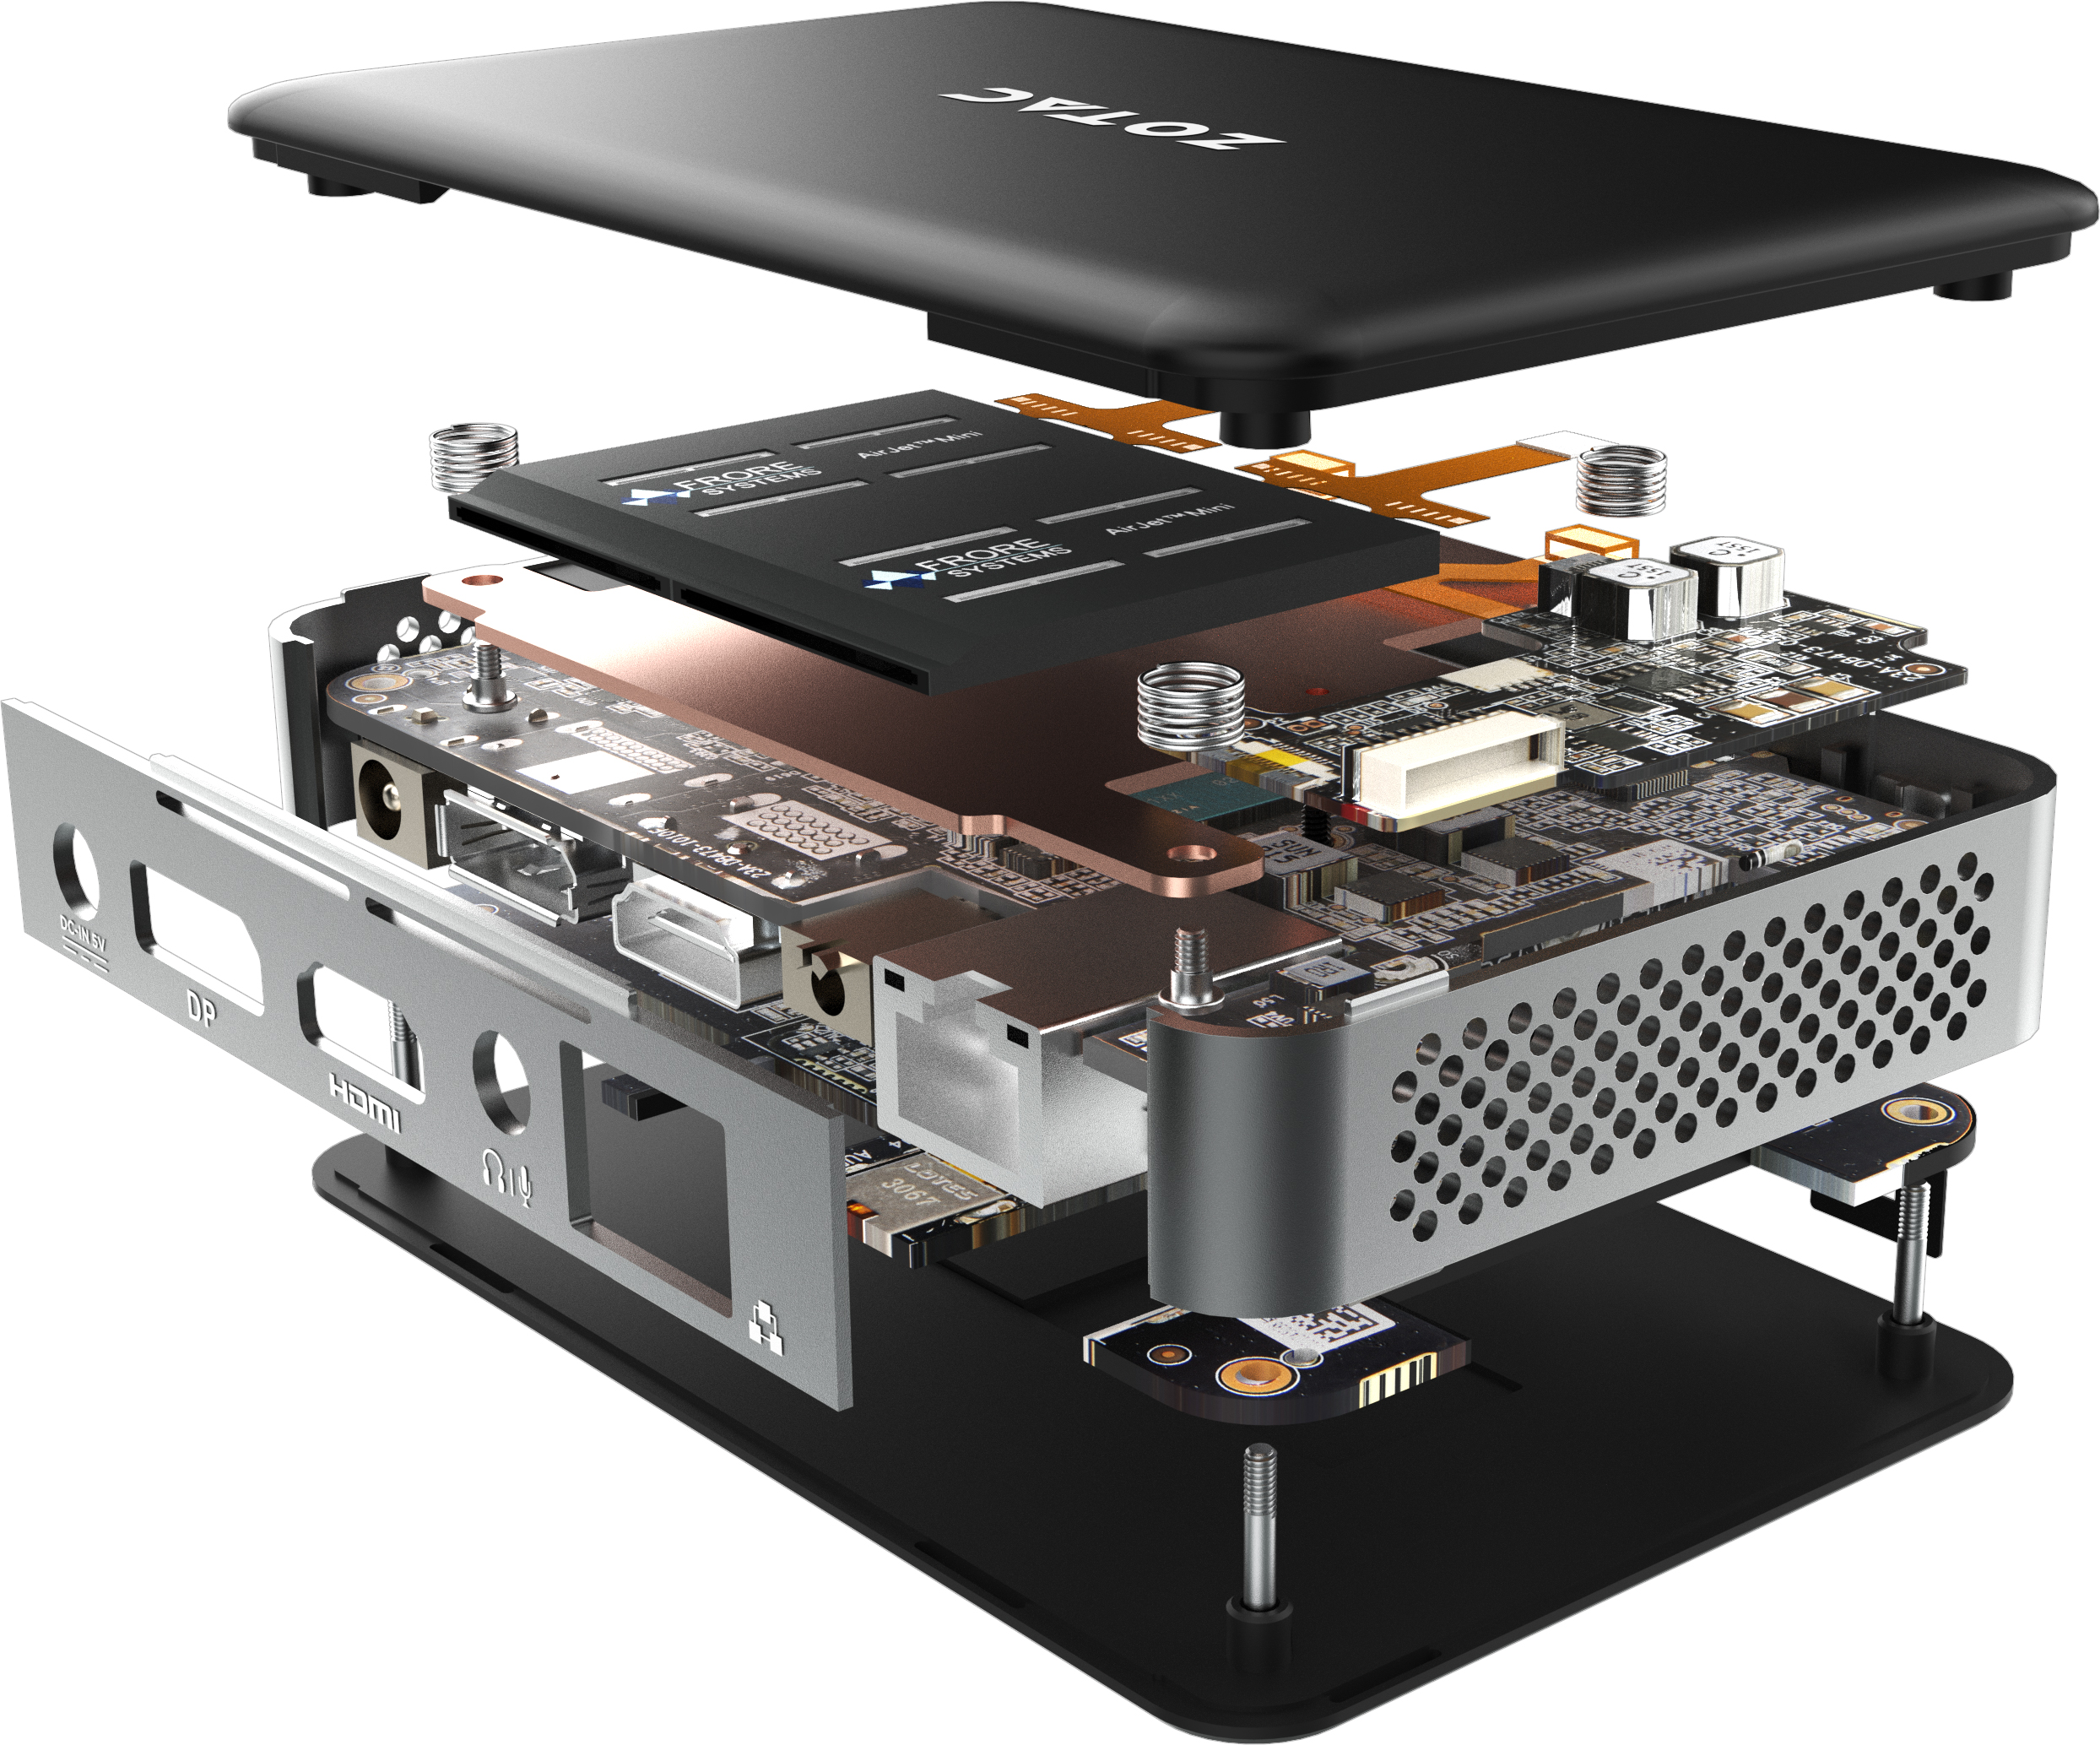 Zotac's Zbox Pico PI430AJ Uses Frore's AirJet Solid-State Active 